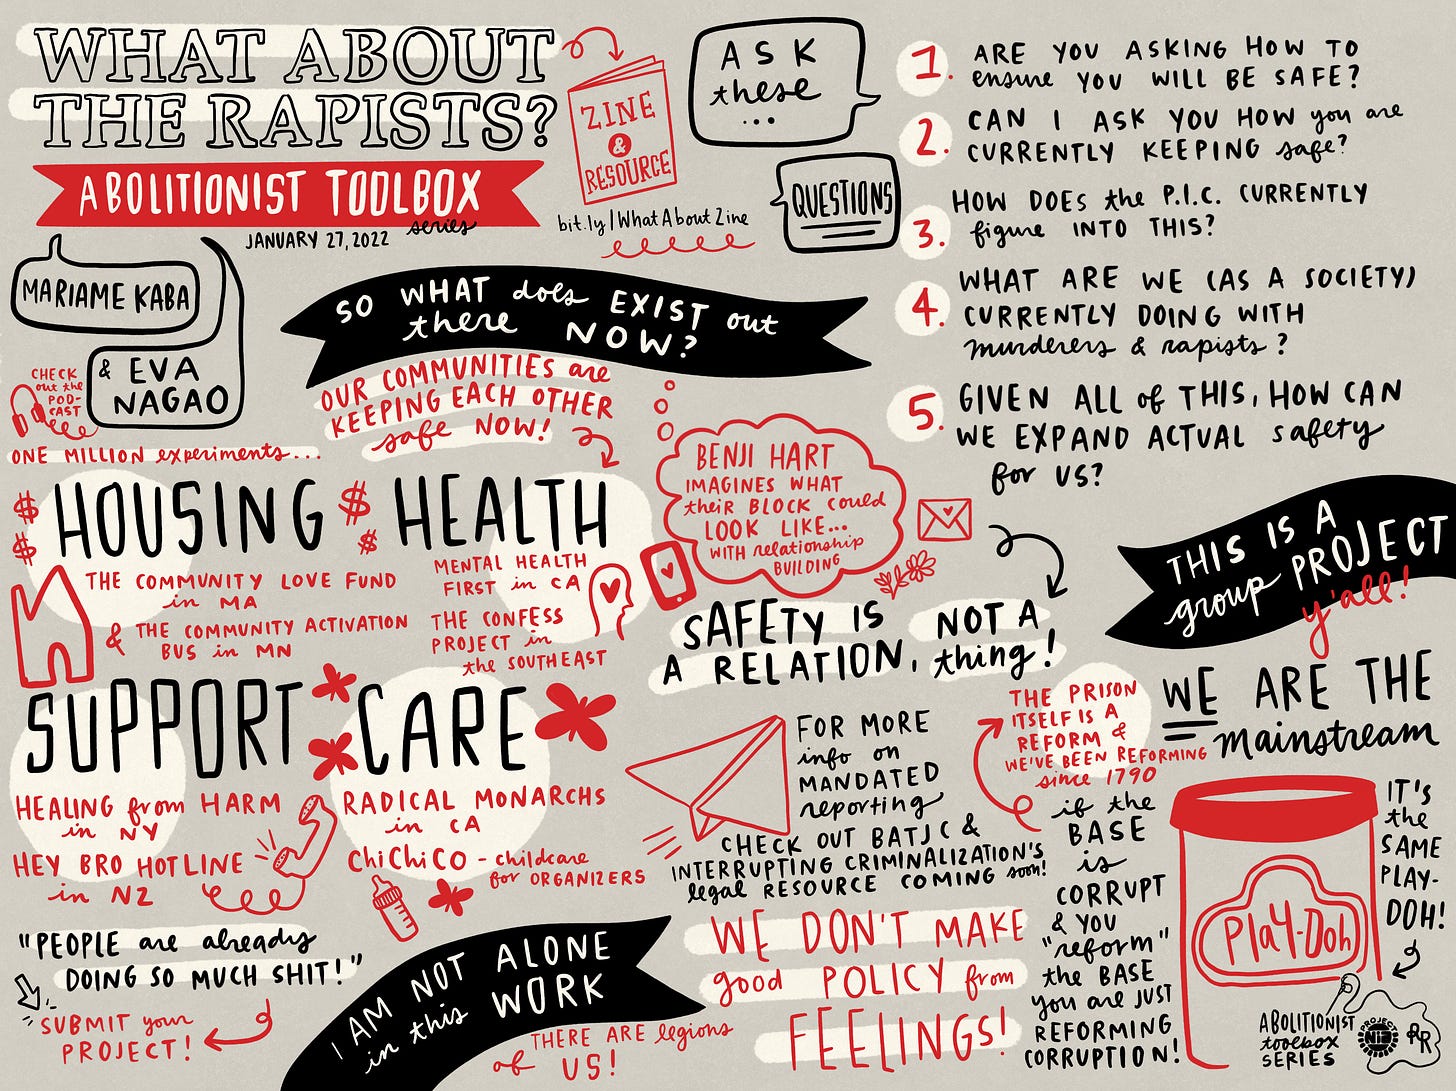 2 of 2 graphic recording images for the "What about the Rapists?" Abolitionist Toolbox Sessions